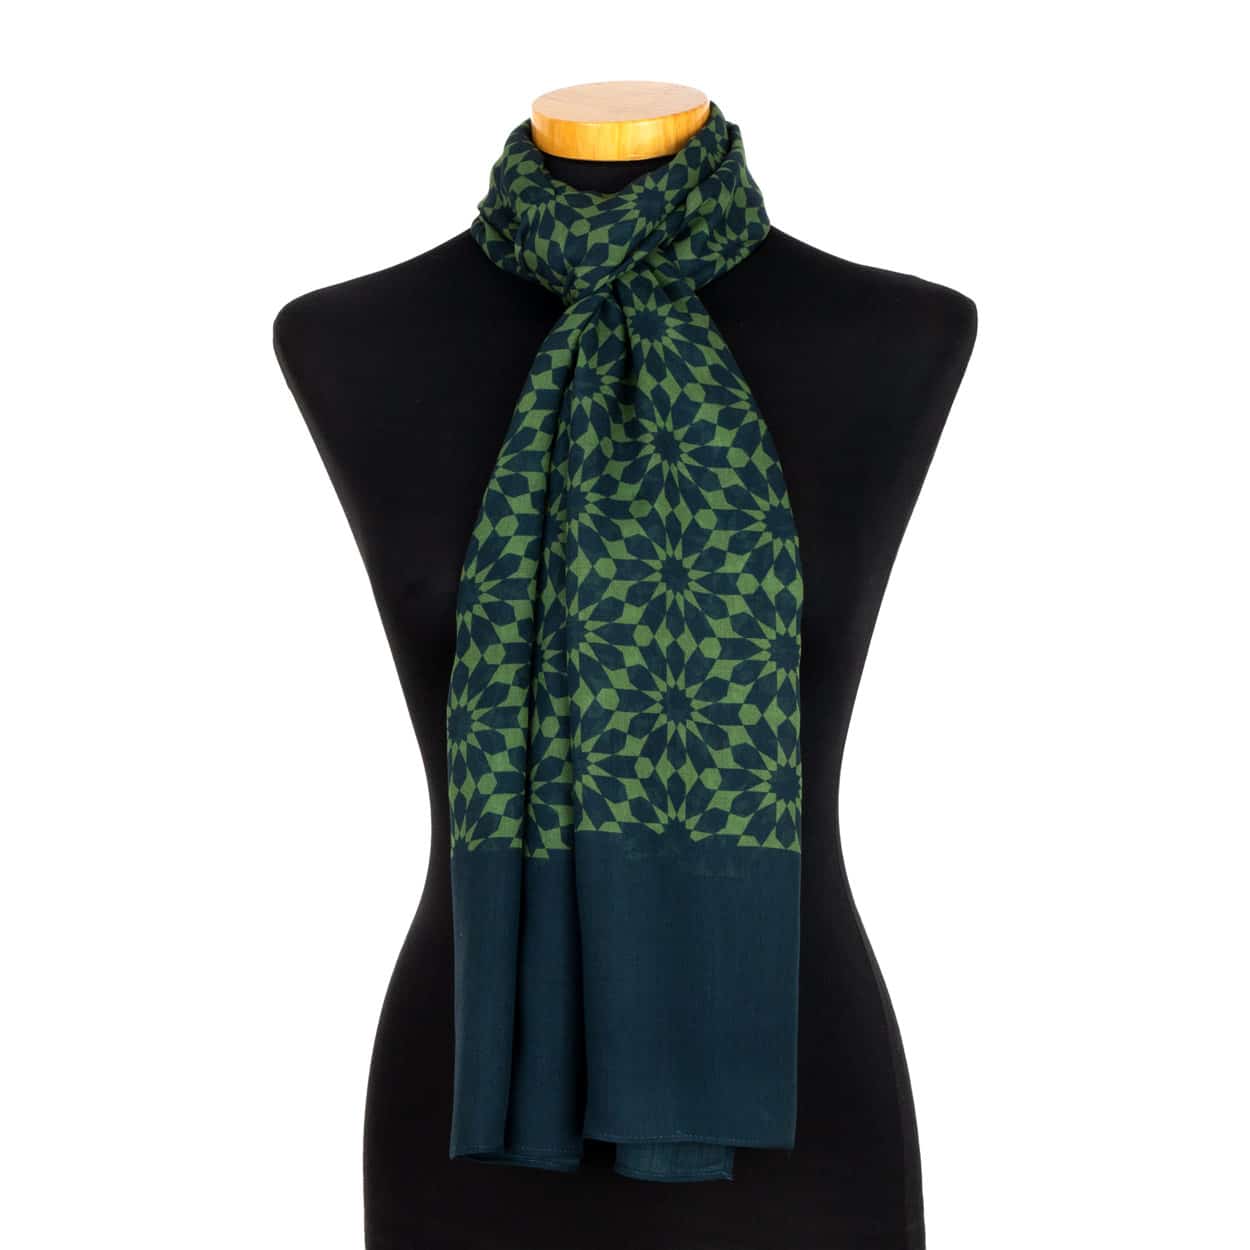 Green neck scarf with geometric pattern inspired by Arabian mosaics